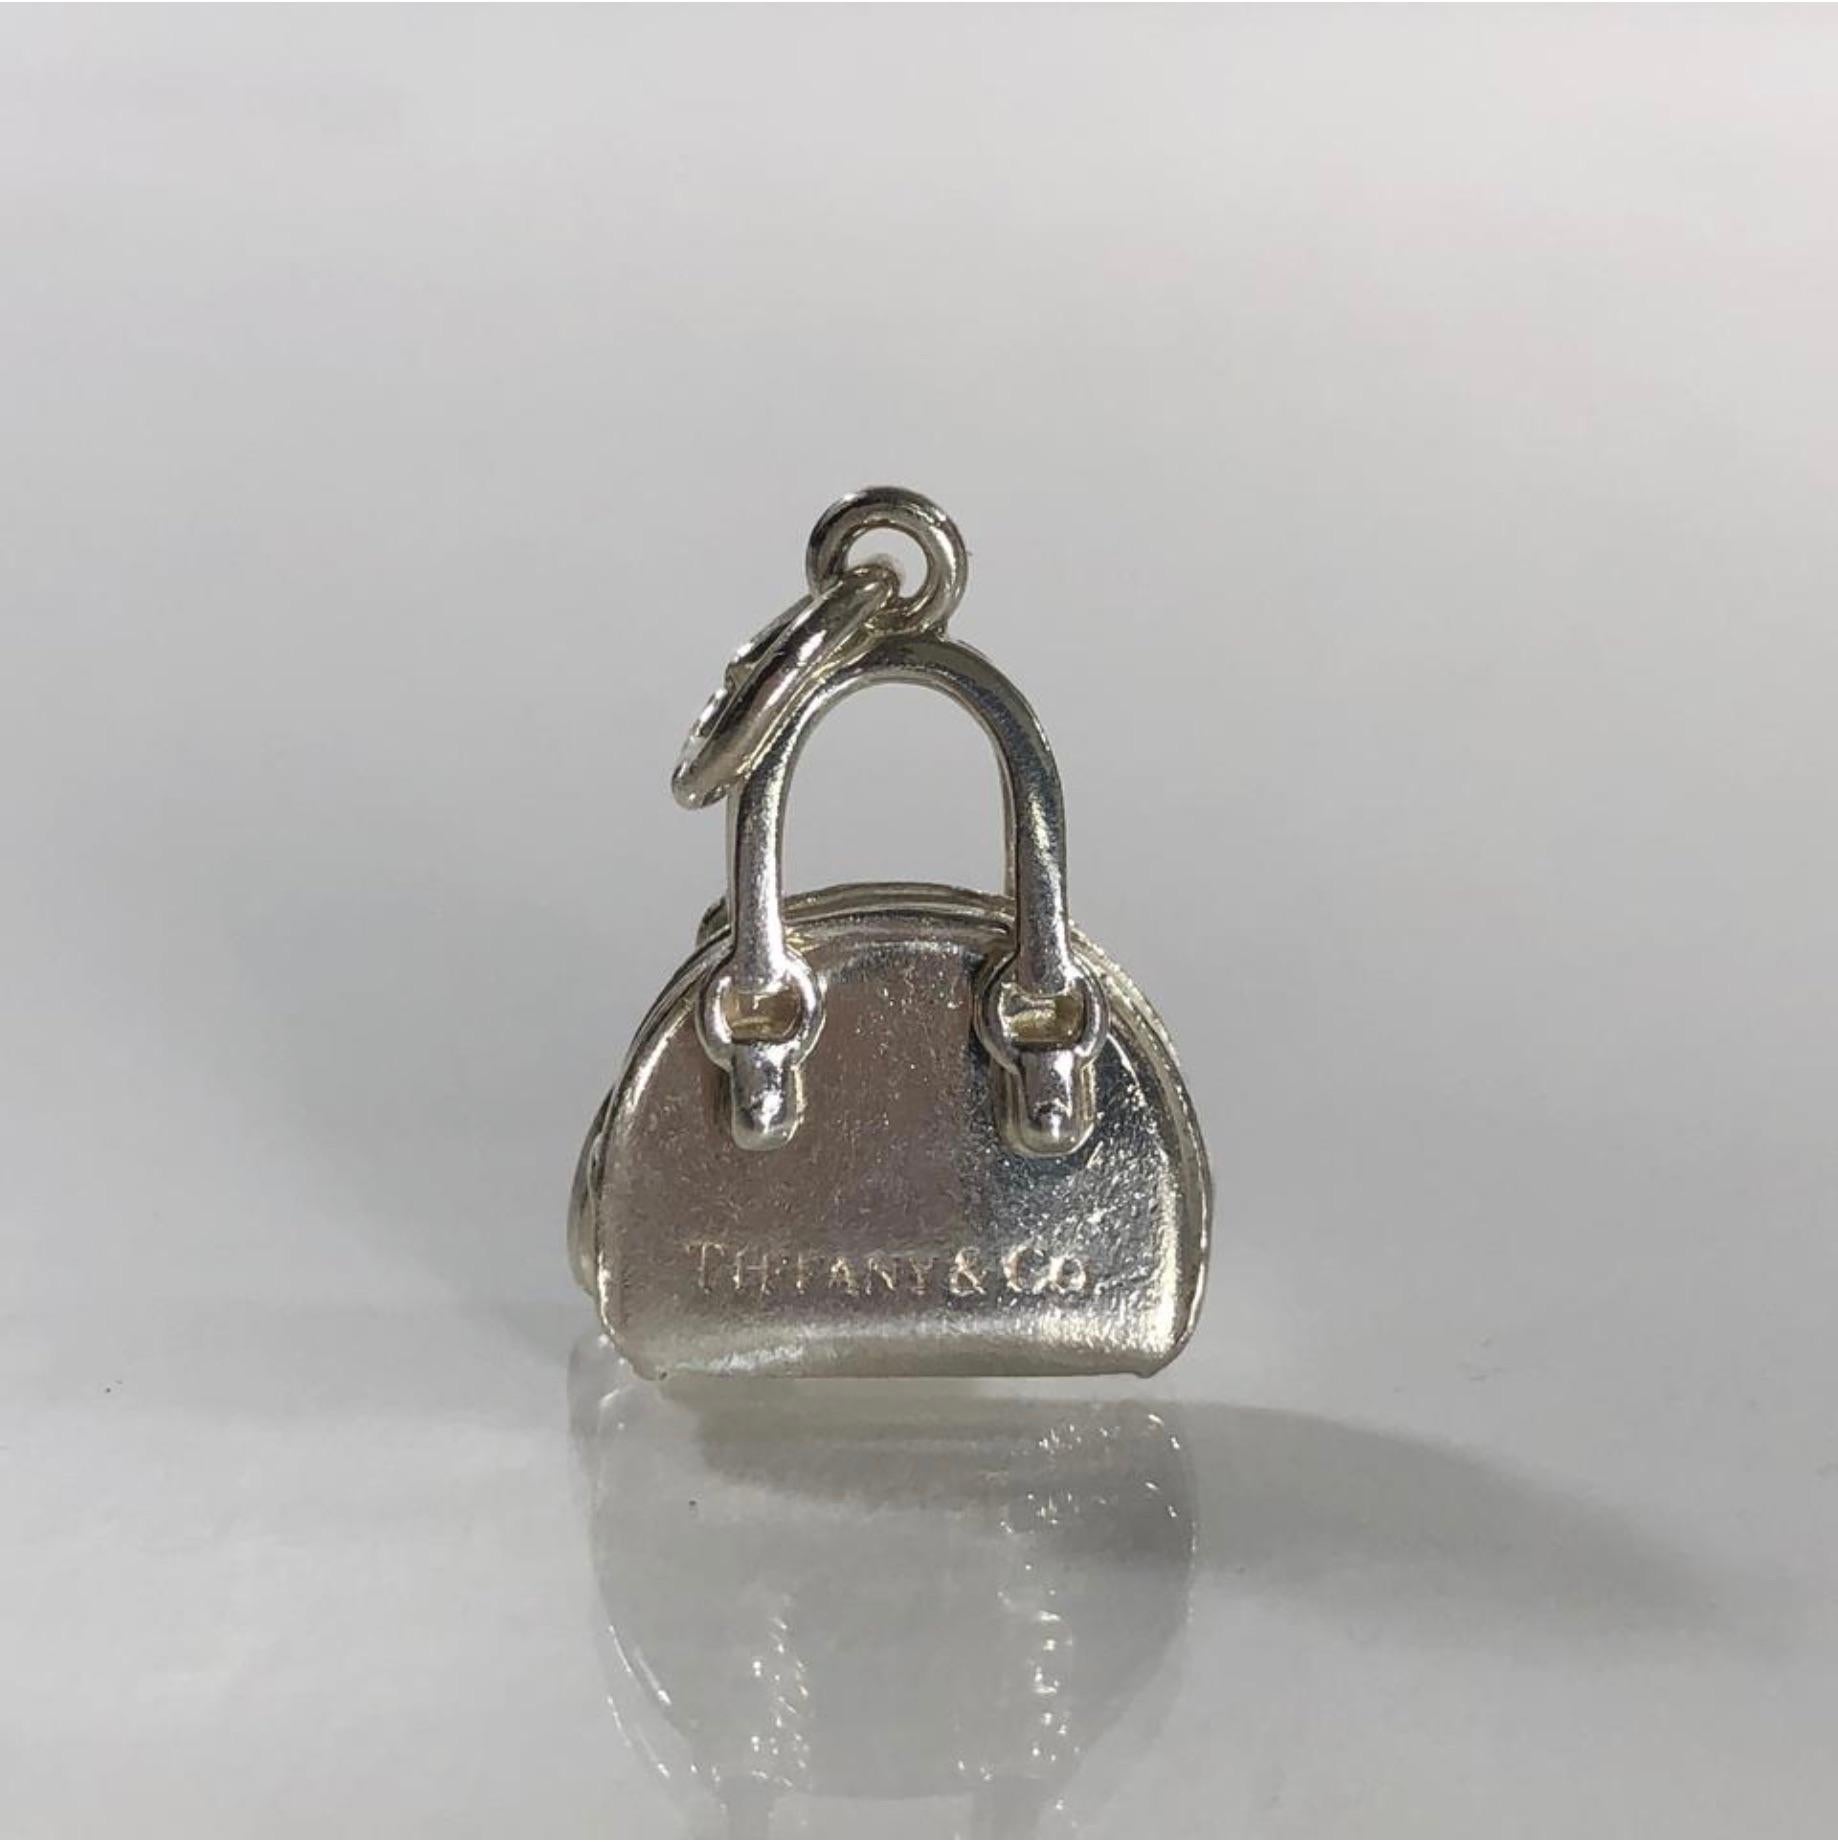 MODEL - Tiffany & Co Sterling Silver Handbag Charm or Pendent w Hanging Heart 

CONDITION - Exceptional!

SKU - 1523

ORIGINAL RETAIL PRICE - $195 + tax

DIMENSIONS - L.5 x H.8 x D.25

CLOSURE TYPE - Not Applicable. Bail for hanging to a bracelet or